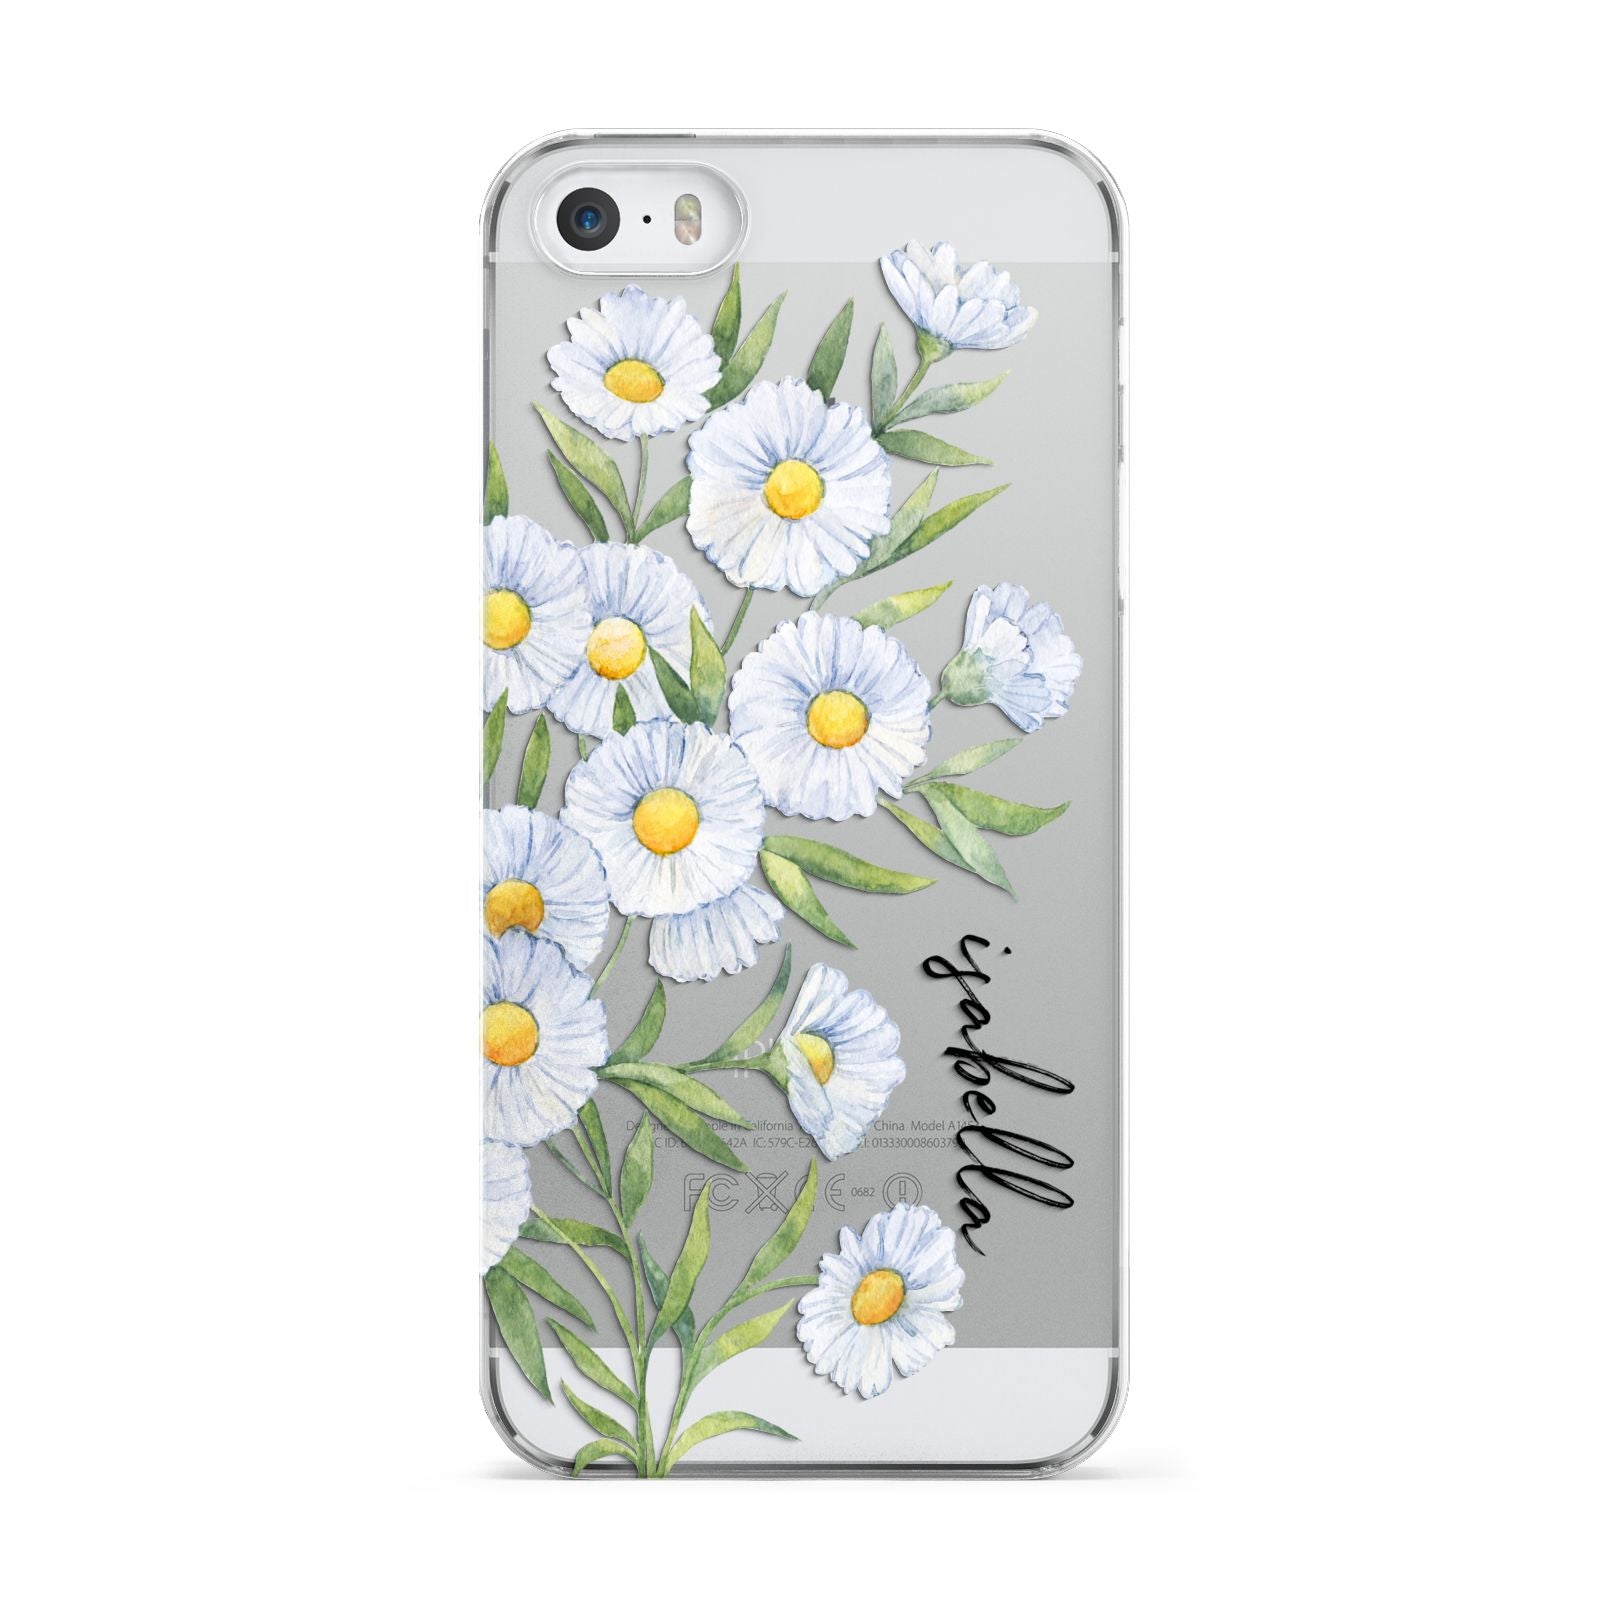 Personalised Daisy Flower Apple iPhone 5 Case